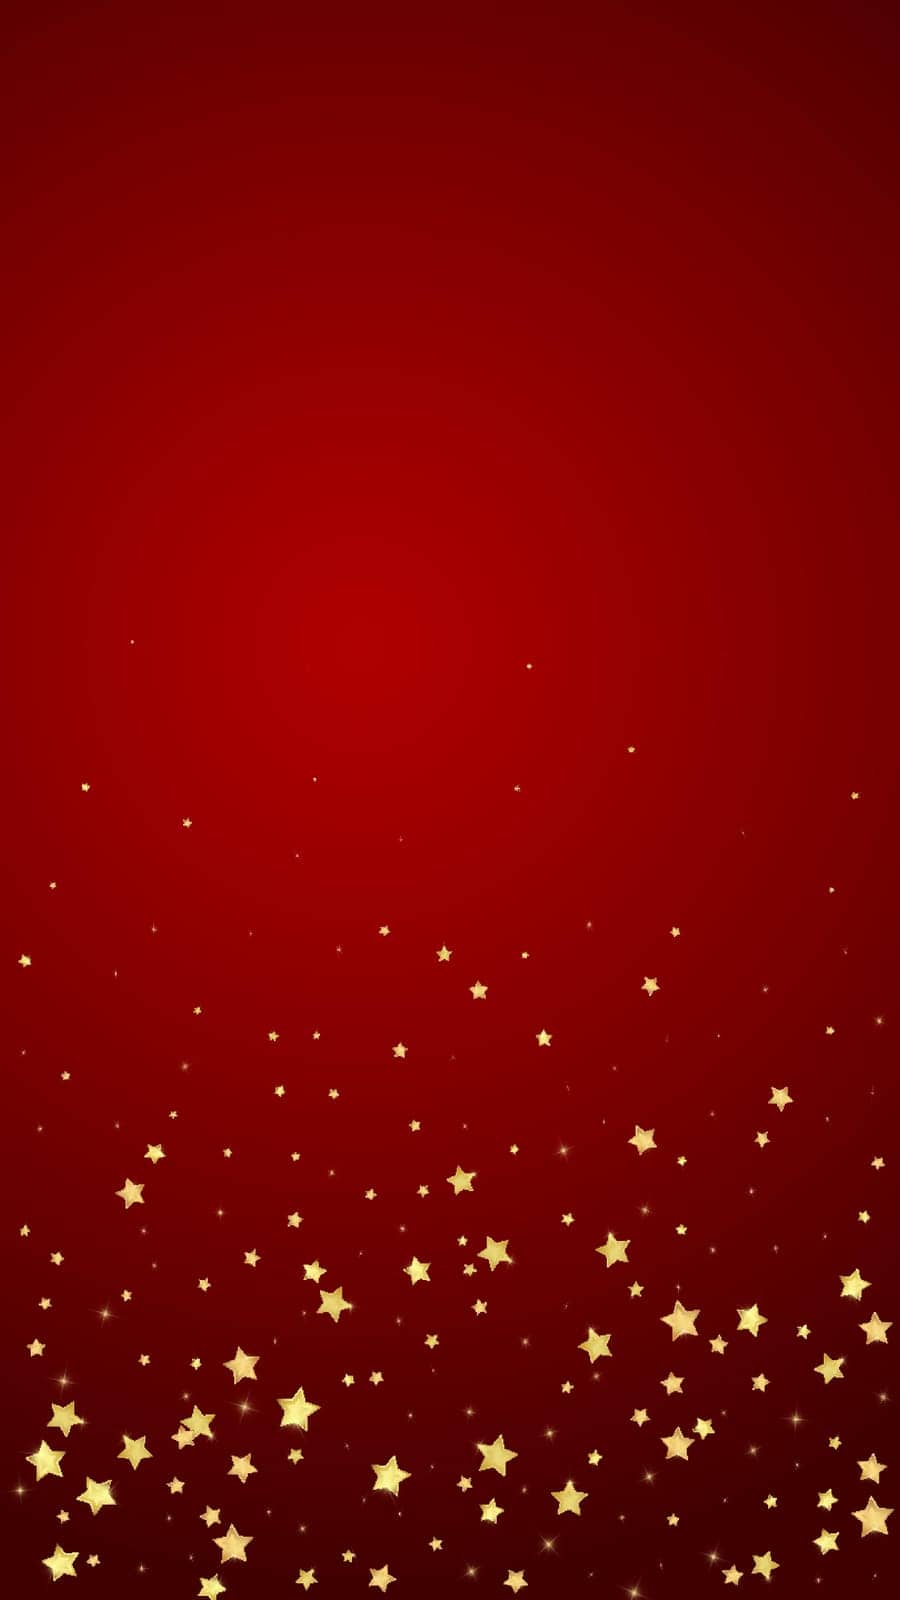 Magic stars vector overlay. Gold stars scattered by beginagain